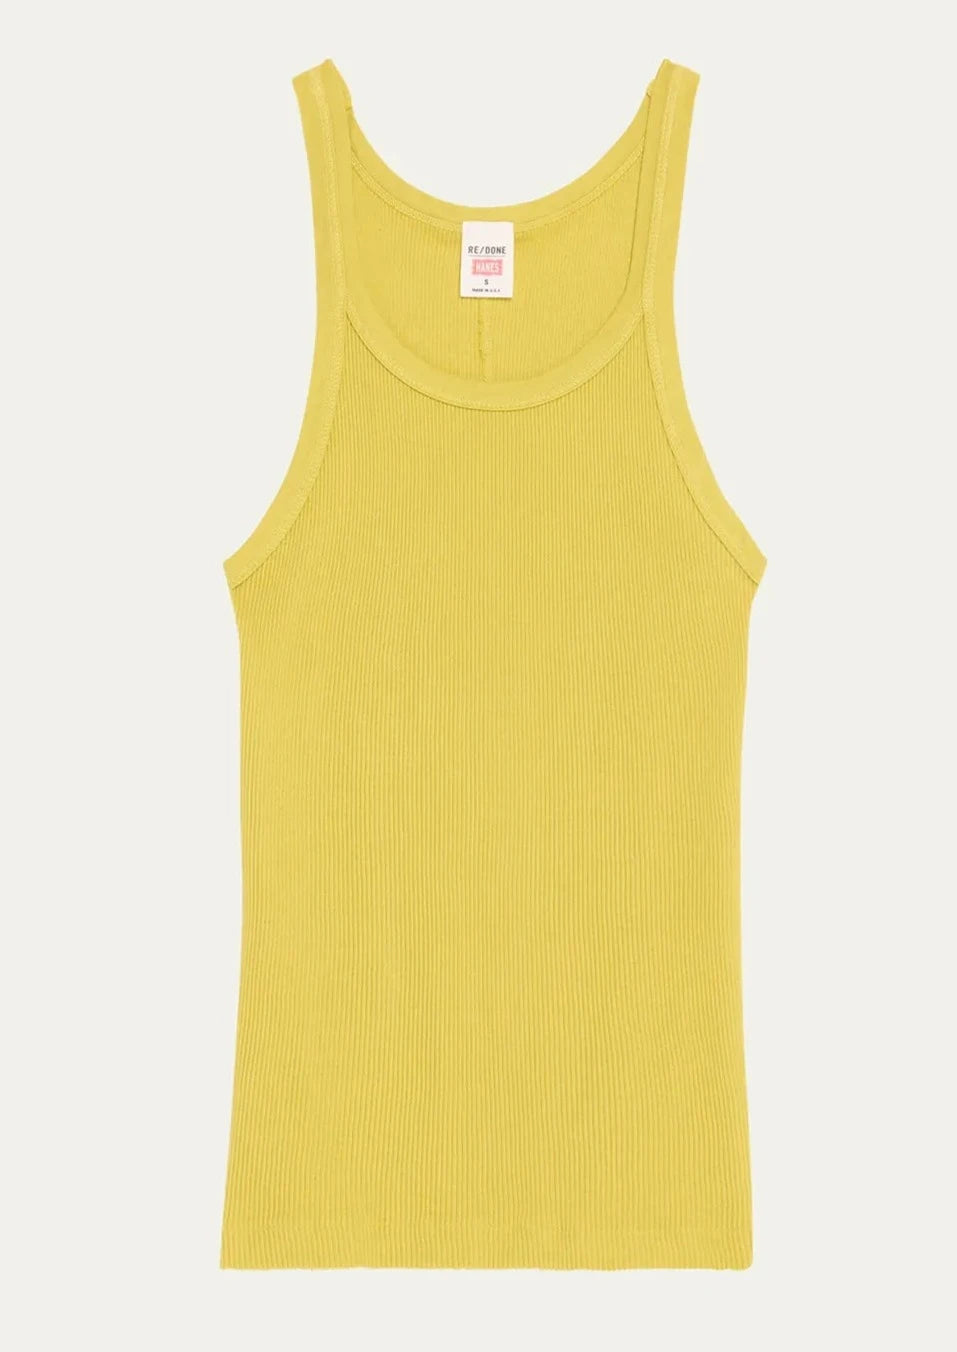 A sleeveless, ribbed yellow Pear Ribbed Tank from RE/DONE is shown against a plain white background. The basic tank has a round neckline and a label on the inner back collar area. Perfect as a summer color staple.